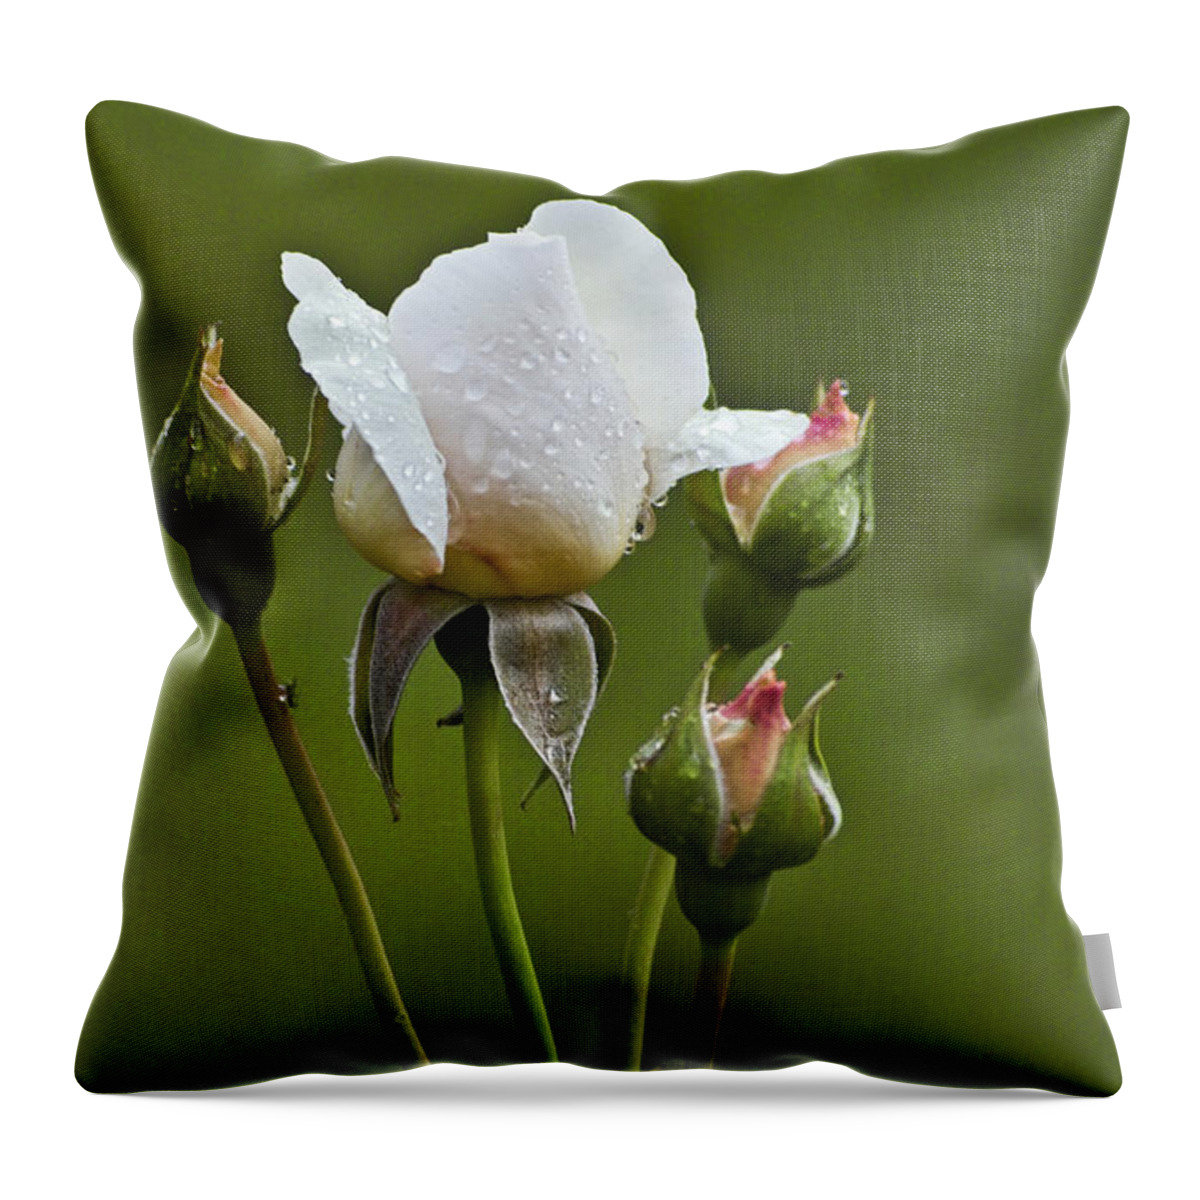 Rose Throw Pillow featuring the photograph Rose Flower Series 6 by Heiko Koehrer-Wagner